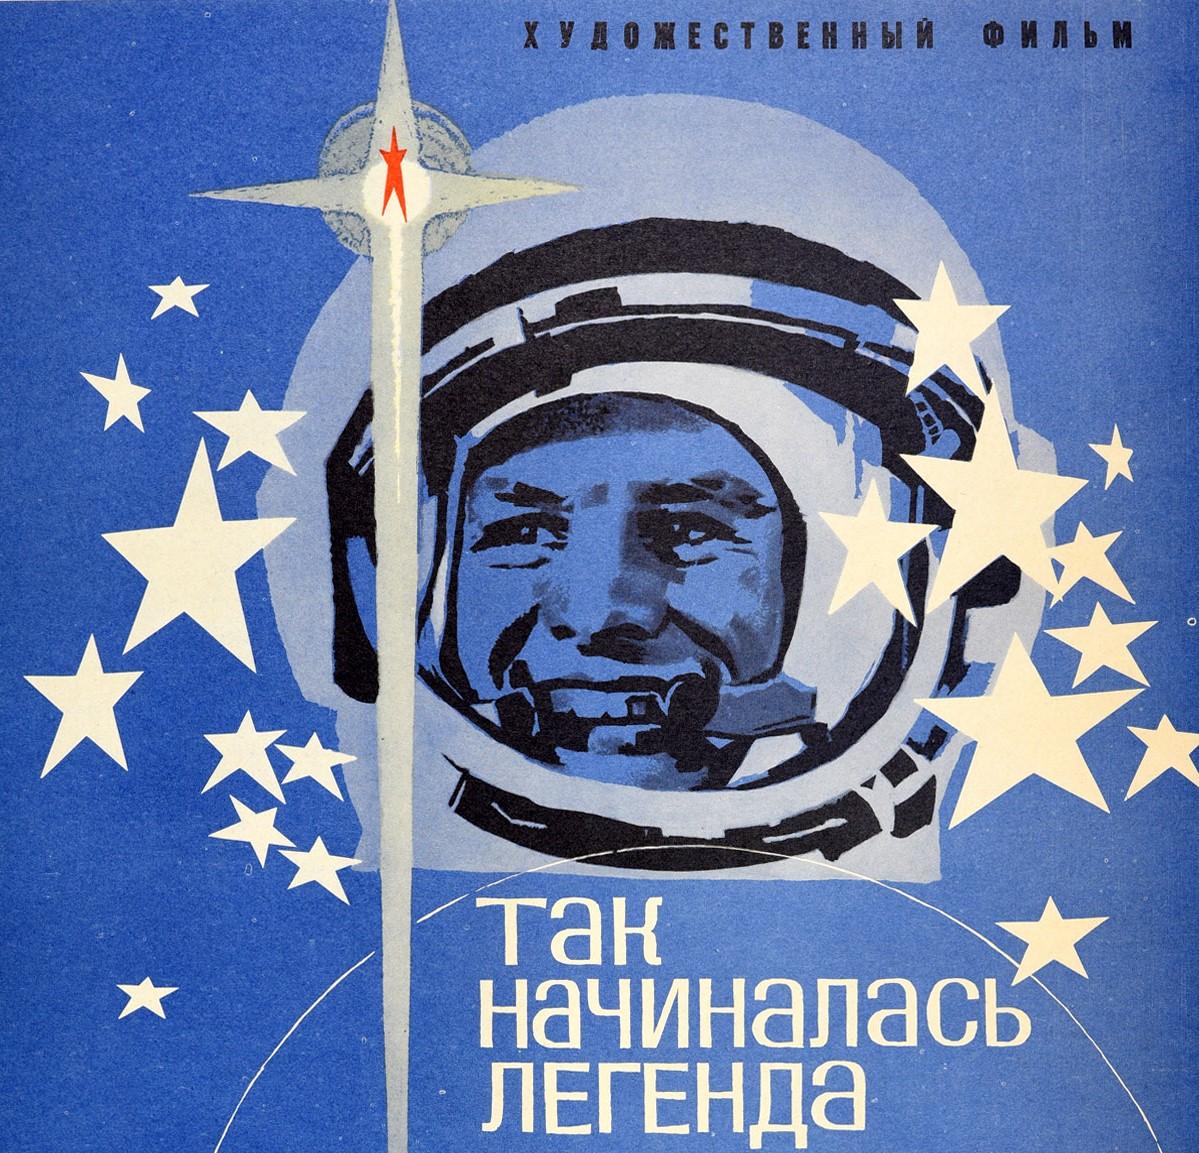 Original vintage Soviet film poster for a biographical drama movie How The Legend Began about the pilot, cosmonaut and first man in space Yuri Gagarin (Yuri Alekseyevich Gagarin; 1934-1968) directed by Boris Grigorev and starring Oleg Orlov, Larisa